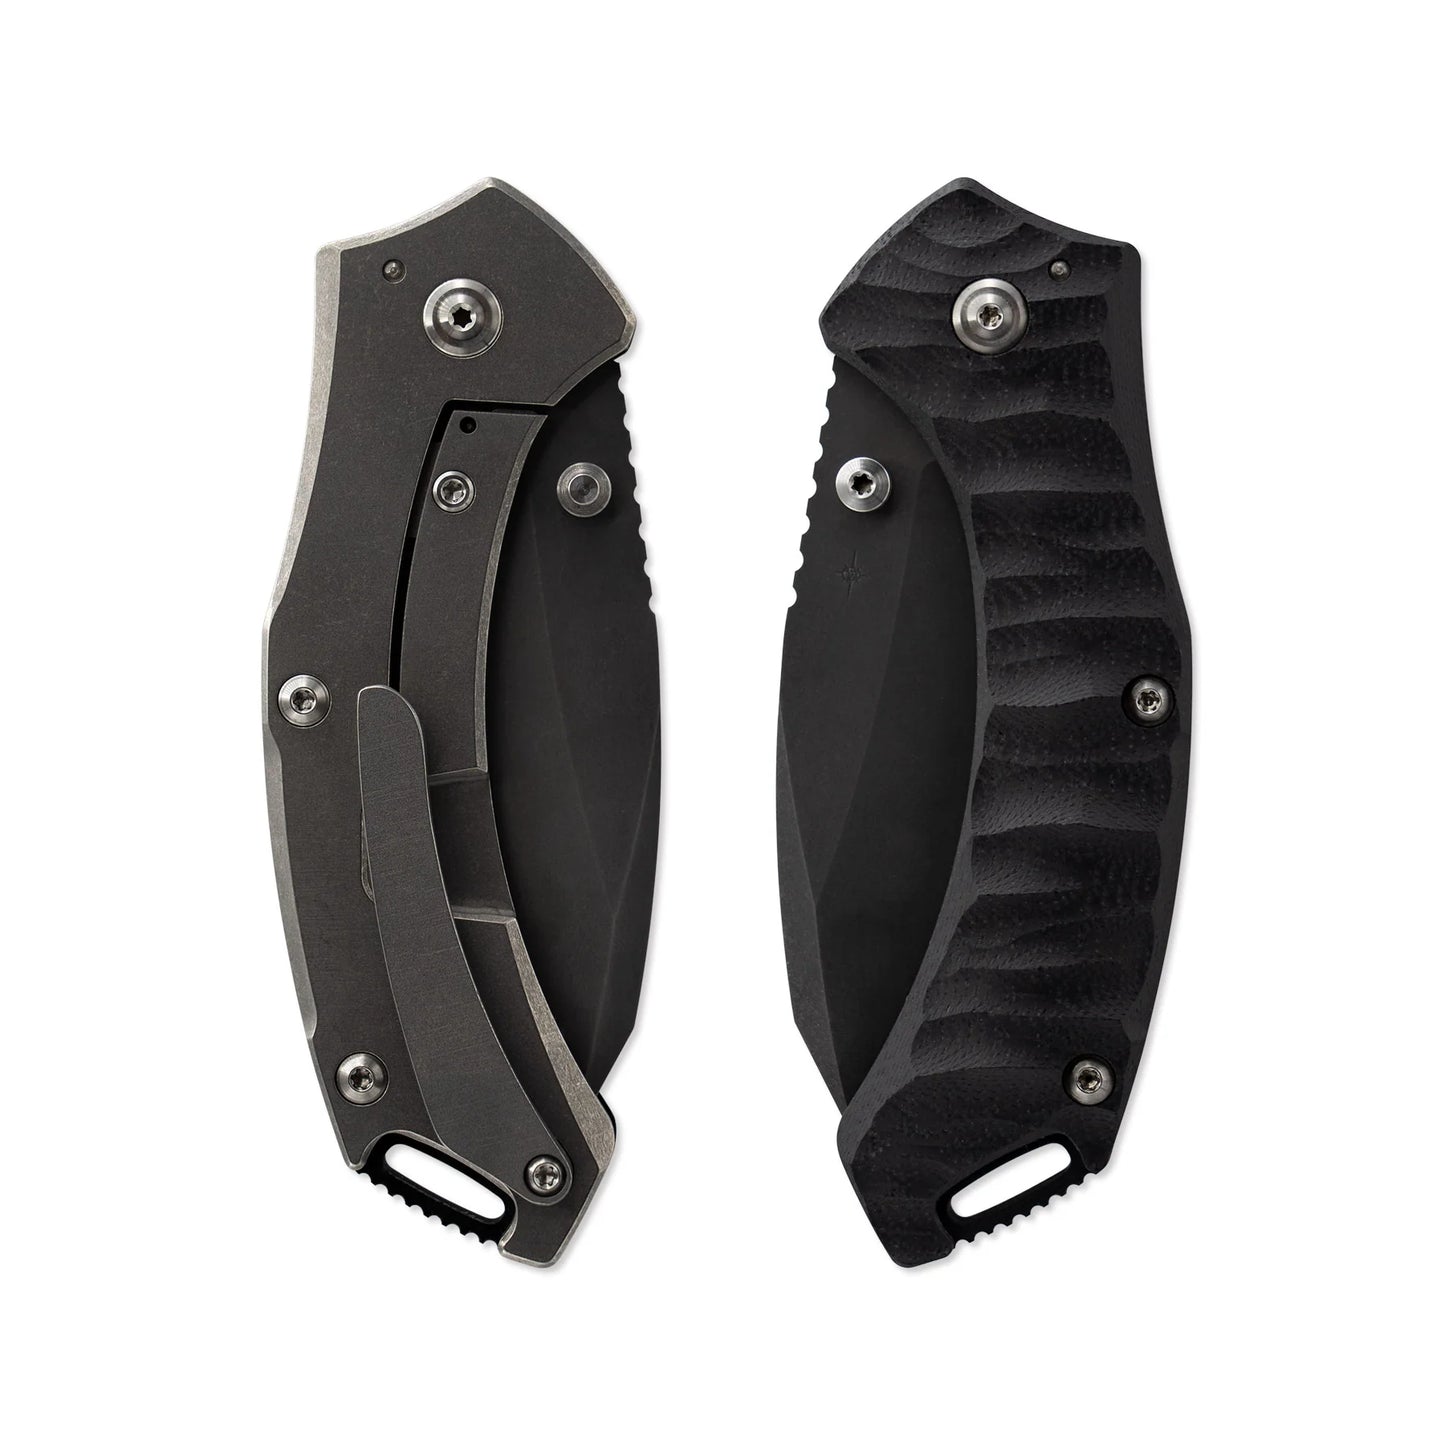 Toor Knives XT1 Charlie Carbon 3